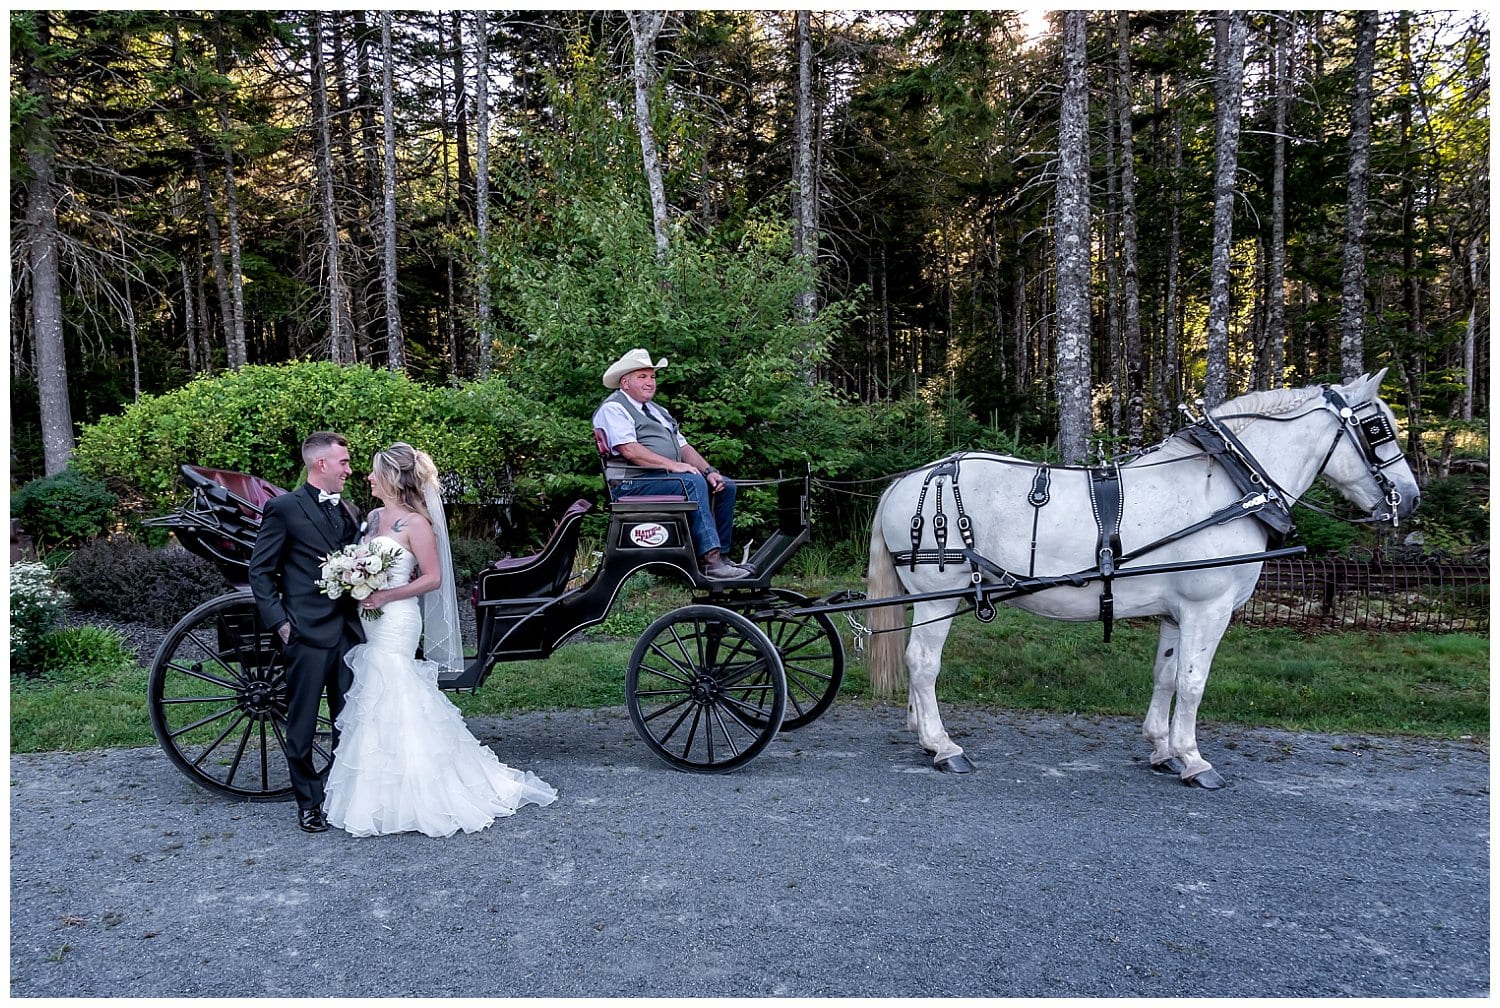 The bride and groom stick their tongues out at each other during wedding photos with the horse and carriage at Hatfield Farm.